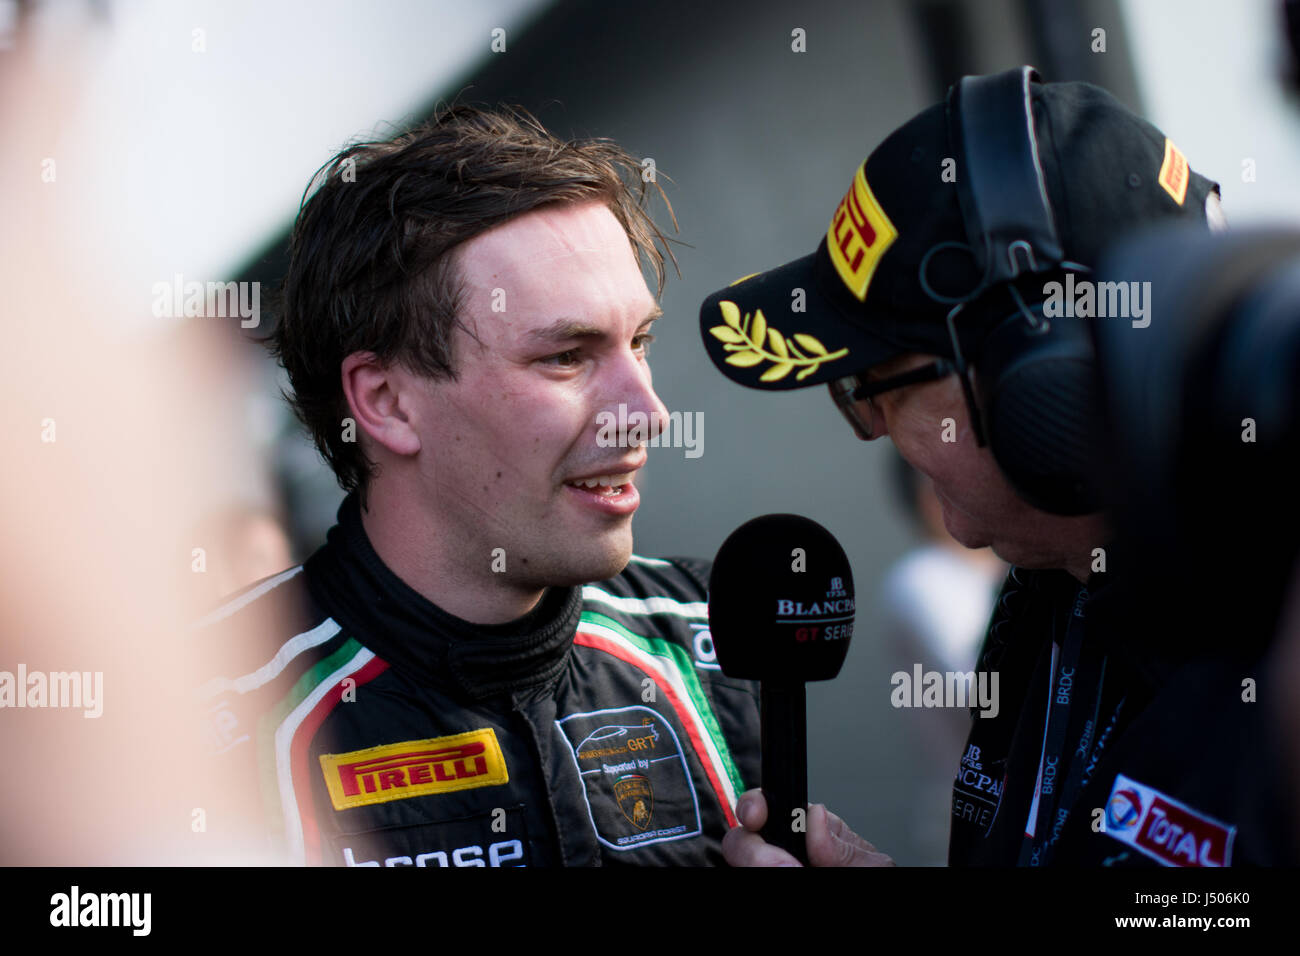 Towcester, Northamptonshire, UK. 14th May, 2017. Blancpain GT Series racing driver  Christian Engelhart and GRT Grasser Racing Team after winning the 3 Hours race of the Blancpain GT Series Endurance Cup at Silverstone Circuit (Photo by Gergo Toth / Alamy Live News) Stock Photo